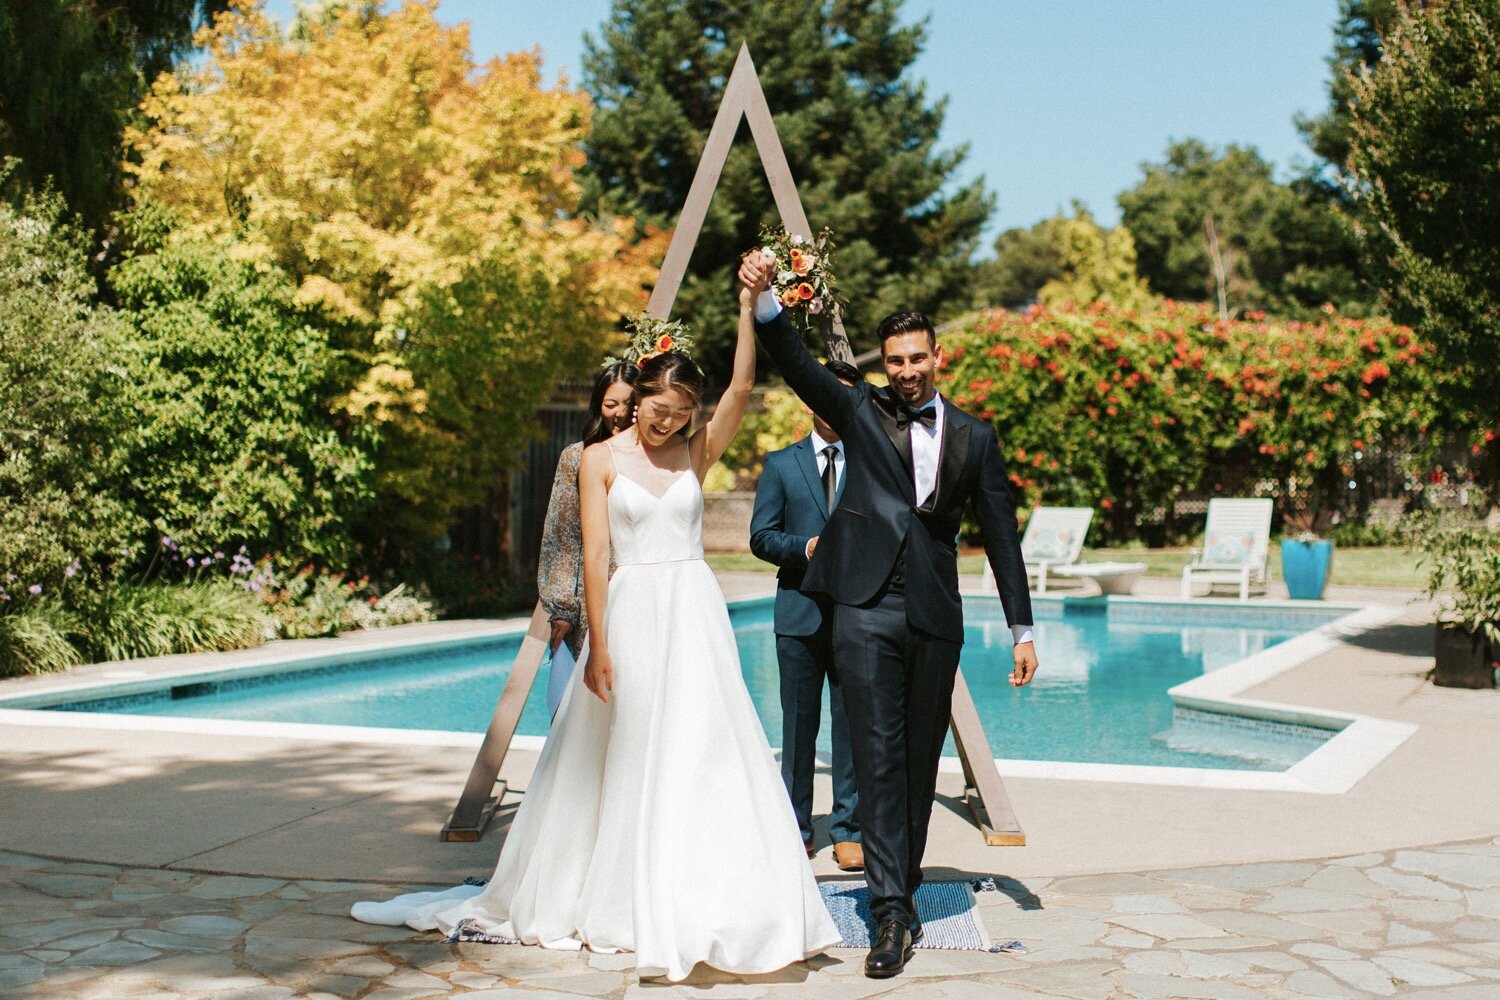  bride and groom cheer excitedly as they are officially pronounced husband and wife at their intimate backyard wedding ceremony in los gatos, california, captured by central coast wedding photographer poppy and vine 